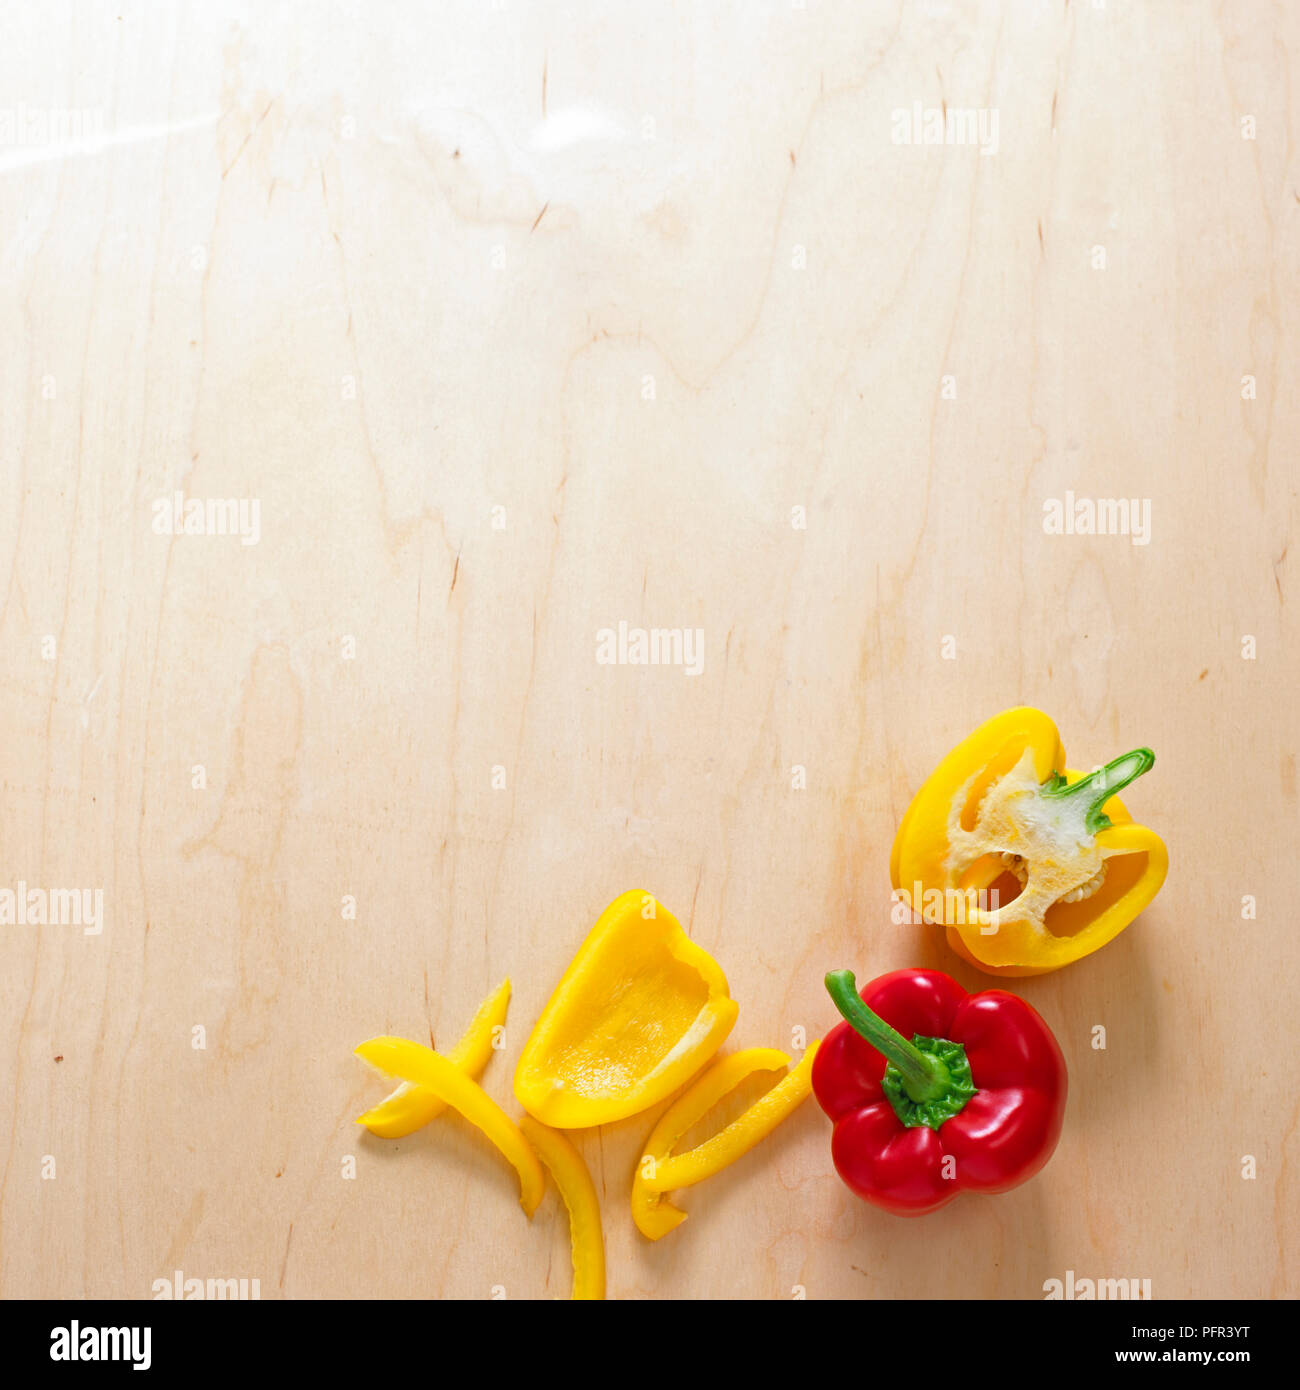 Whole, halved, cored and sliced bell peppers on wooden surface Stock Photo